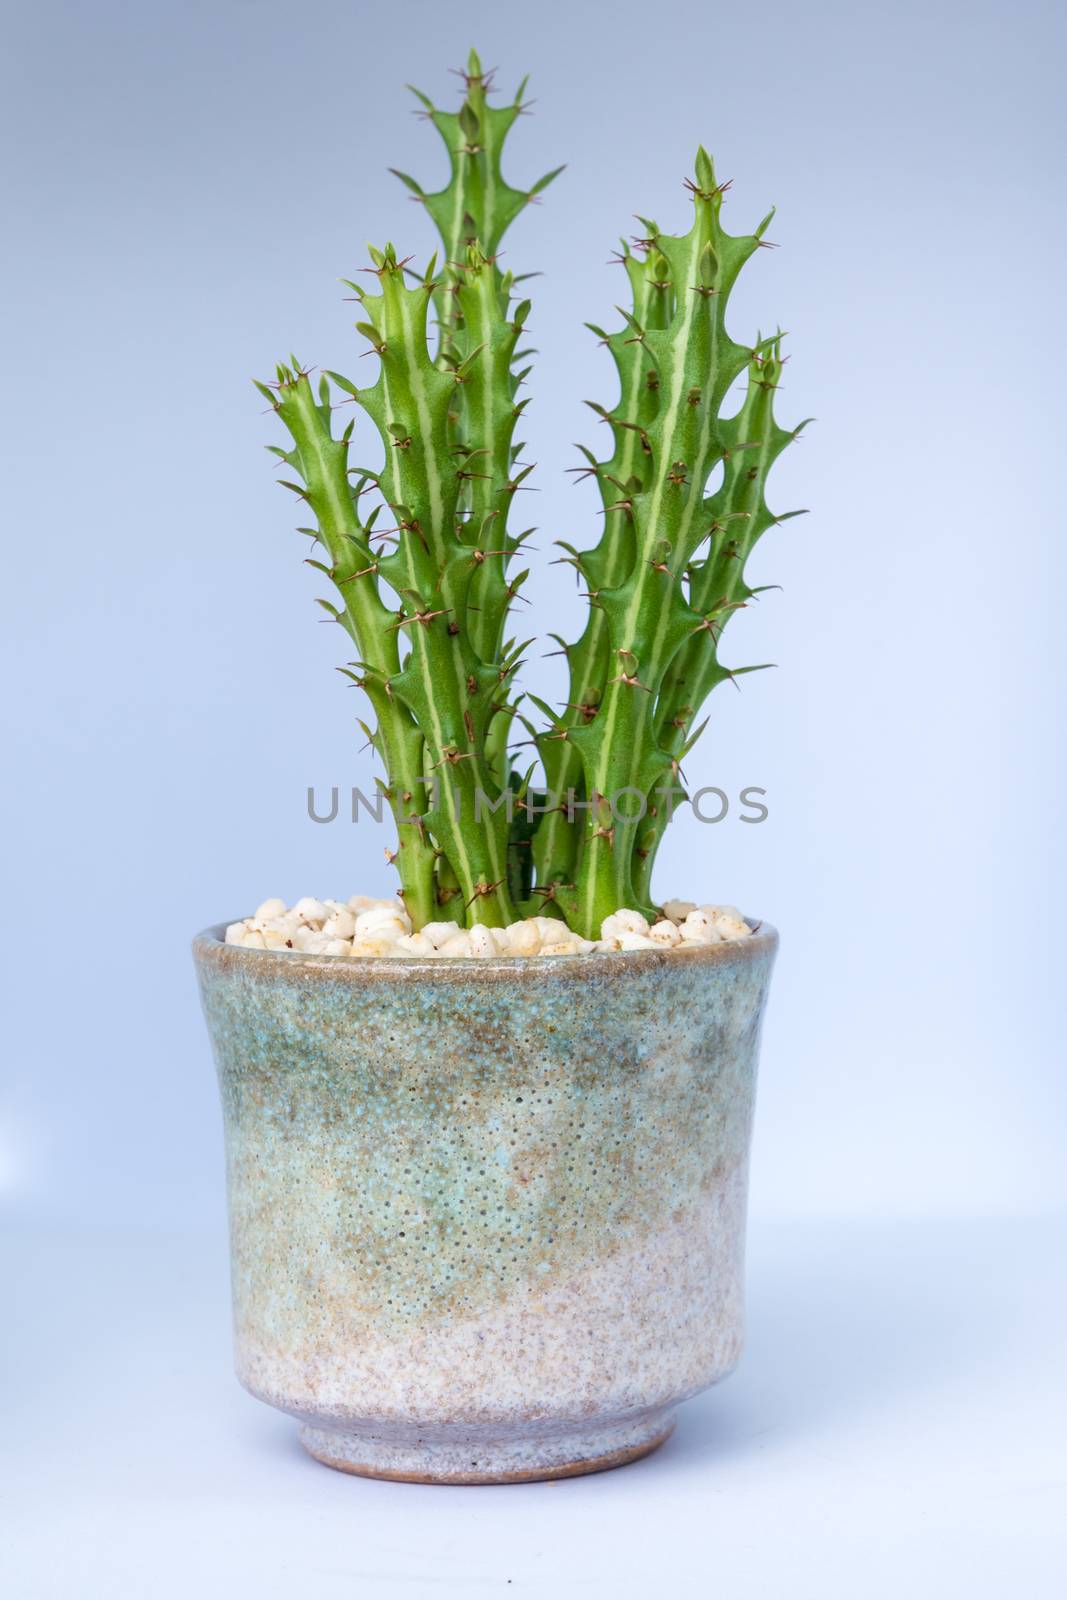 Euphorbia knuthii cactus growing in the small ceramic pot, houseplant for room decoration